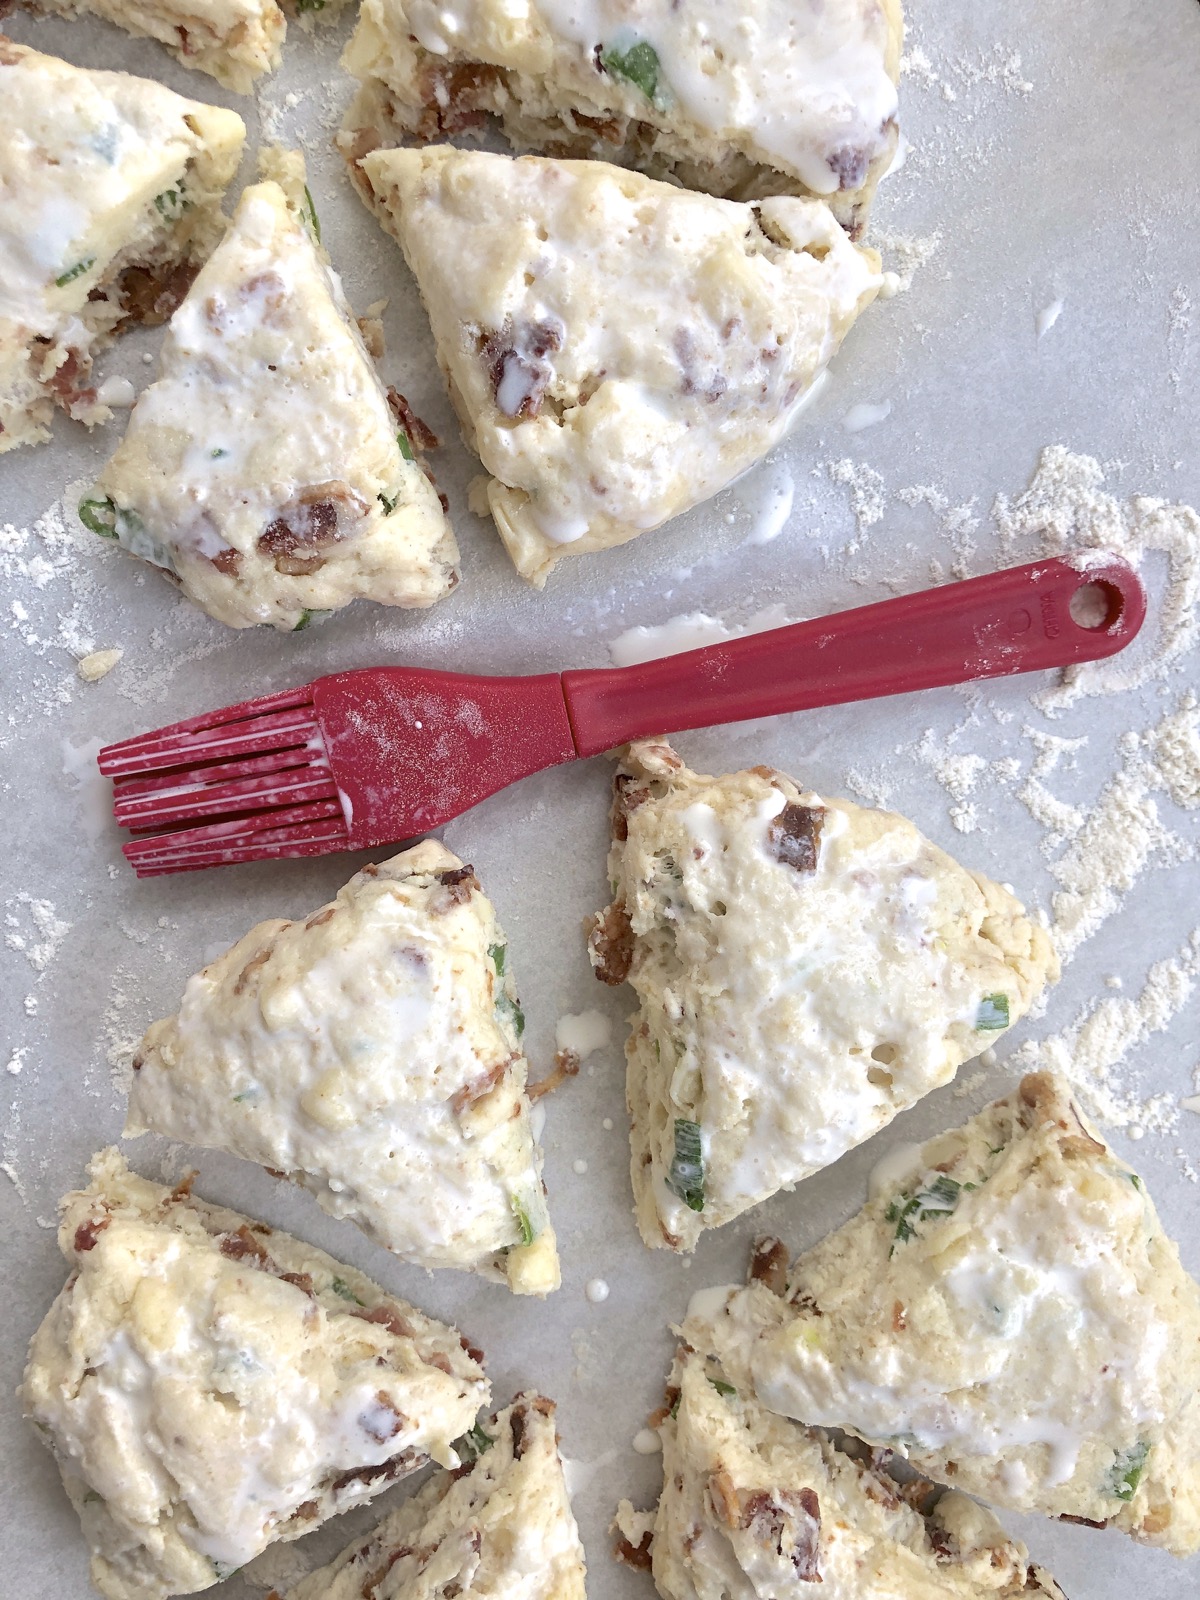 Bacon cheddar chive scones cut into wedges on a baking sheet and brushed with cream using a red silicone pastry brush.